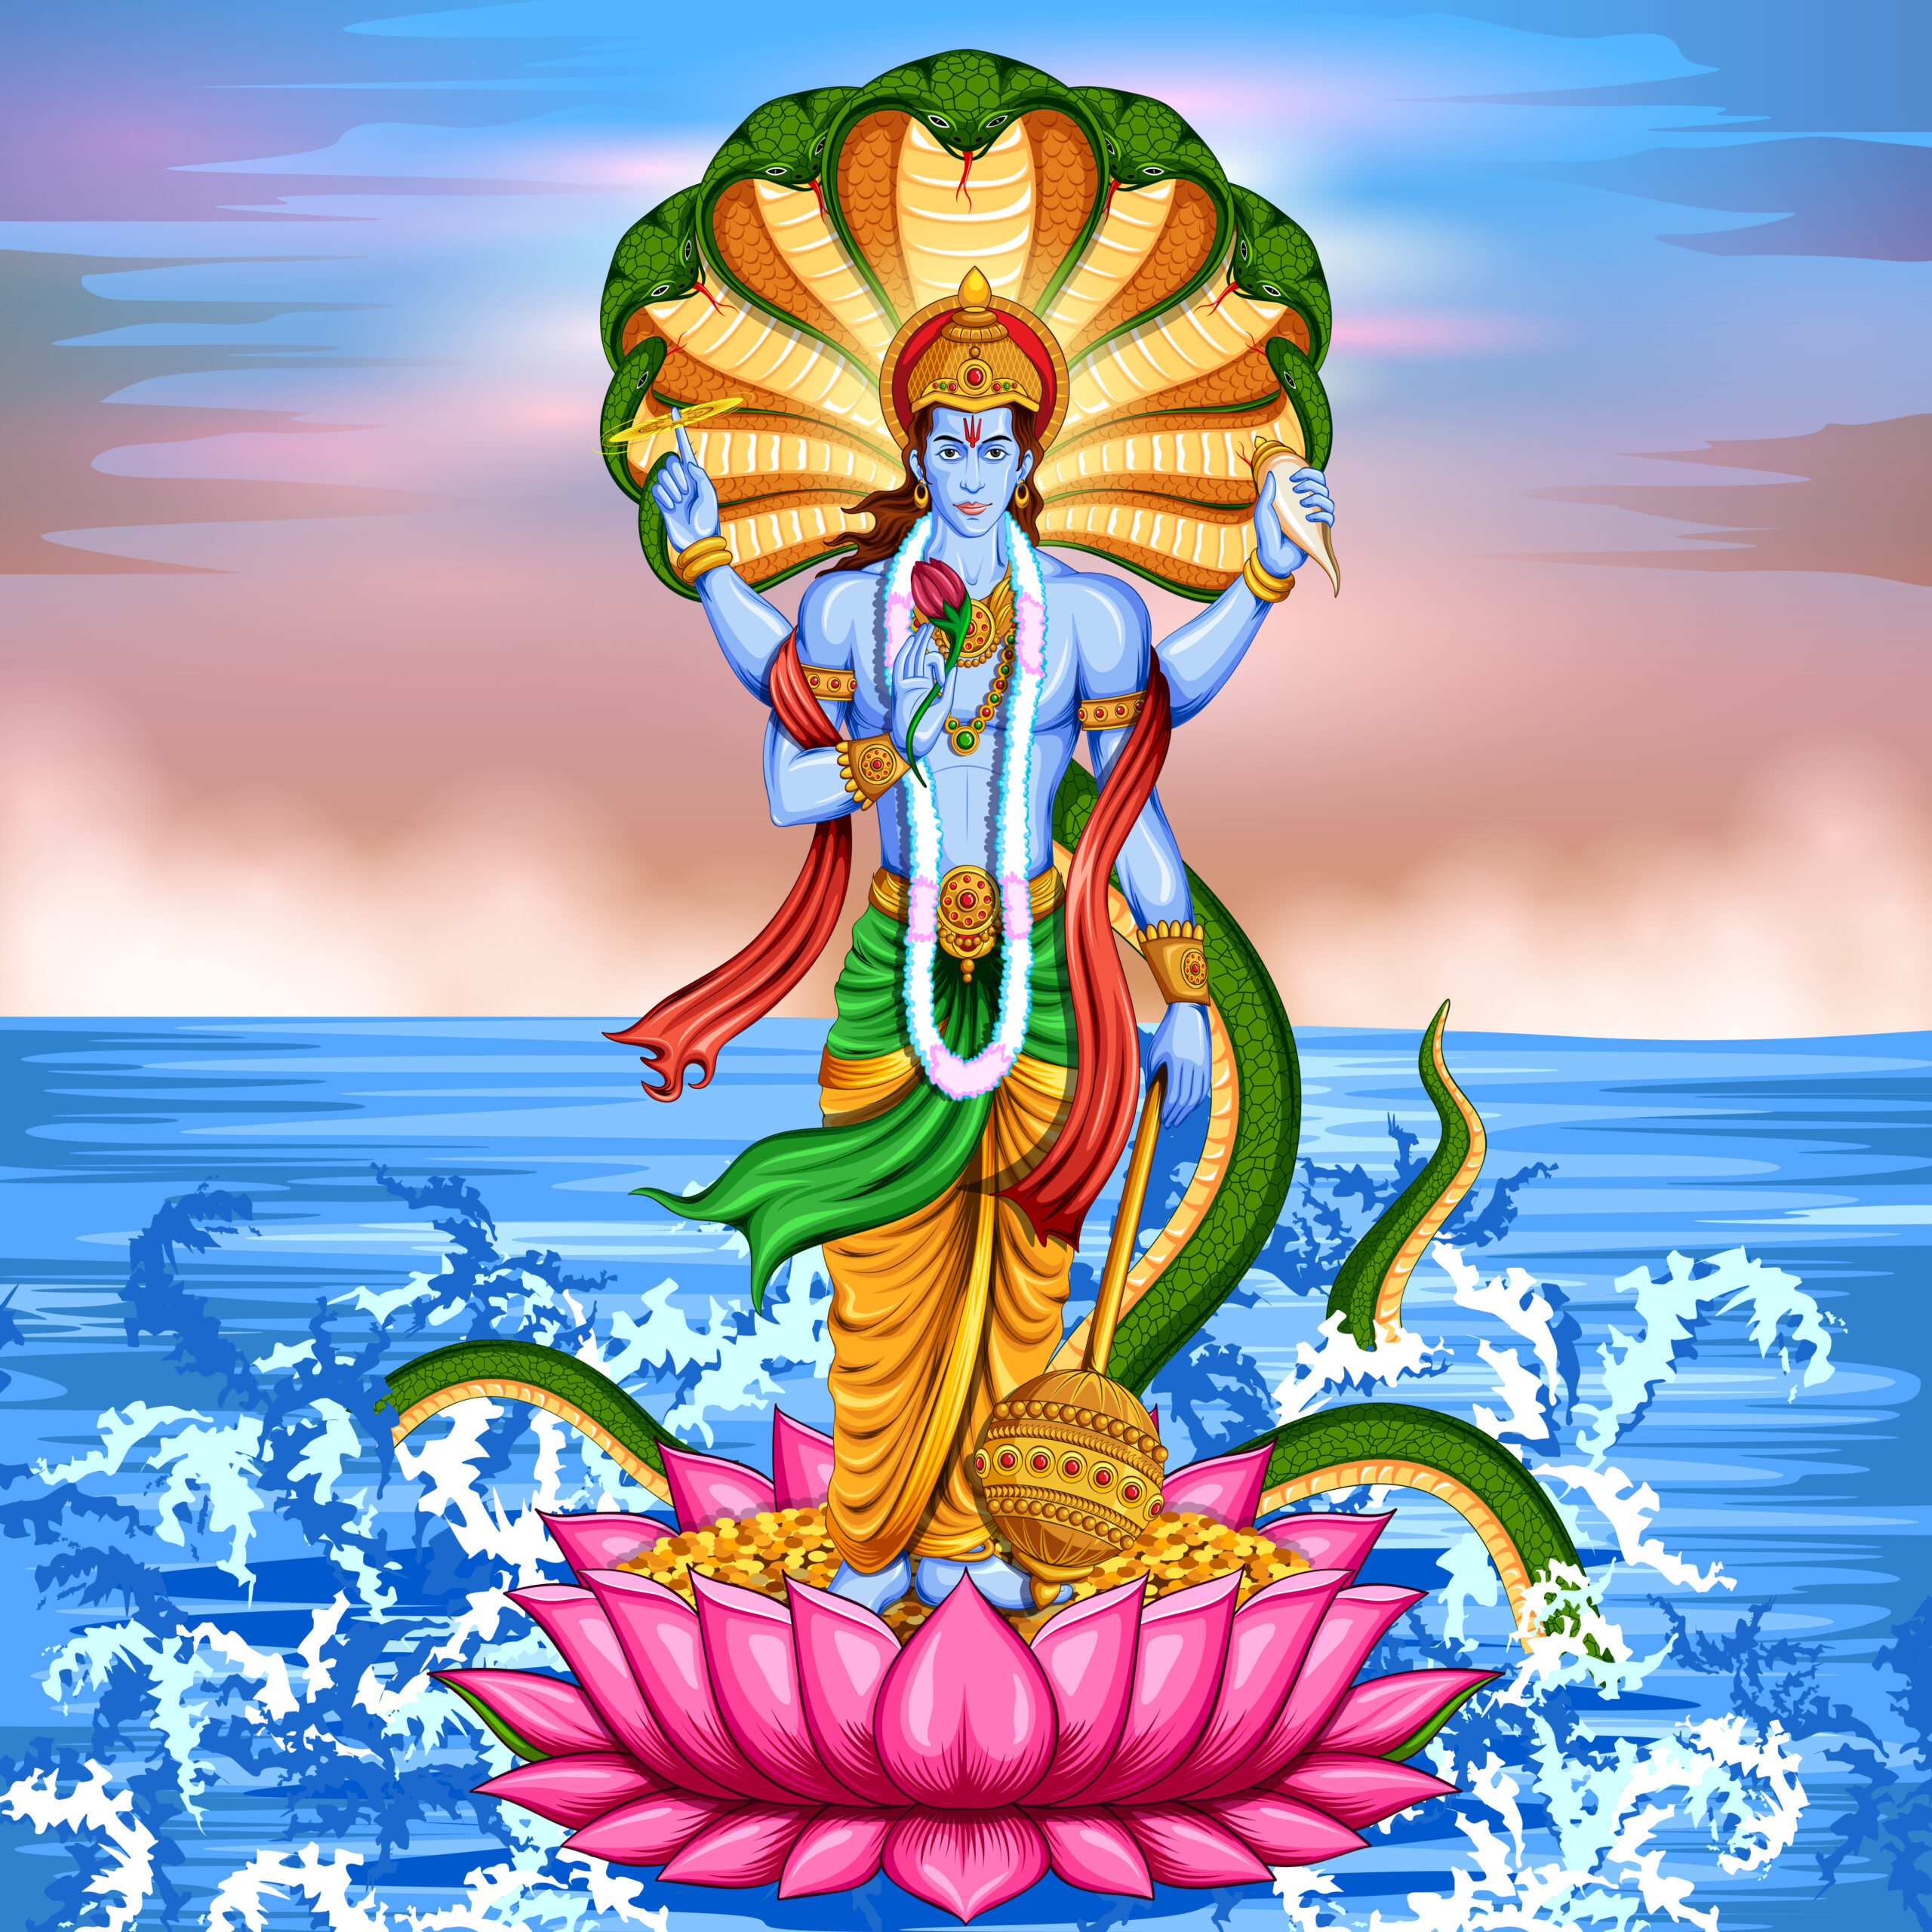 an illustration of Lord Vishnu, one of the gods in the Bhakti Movement